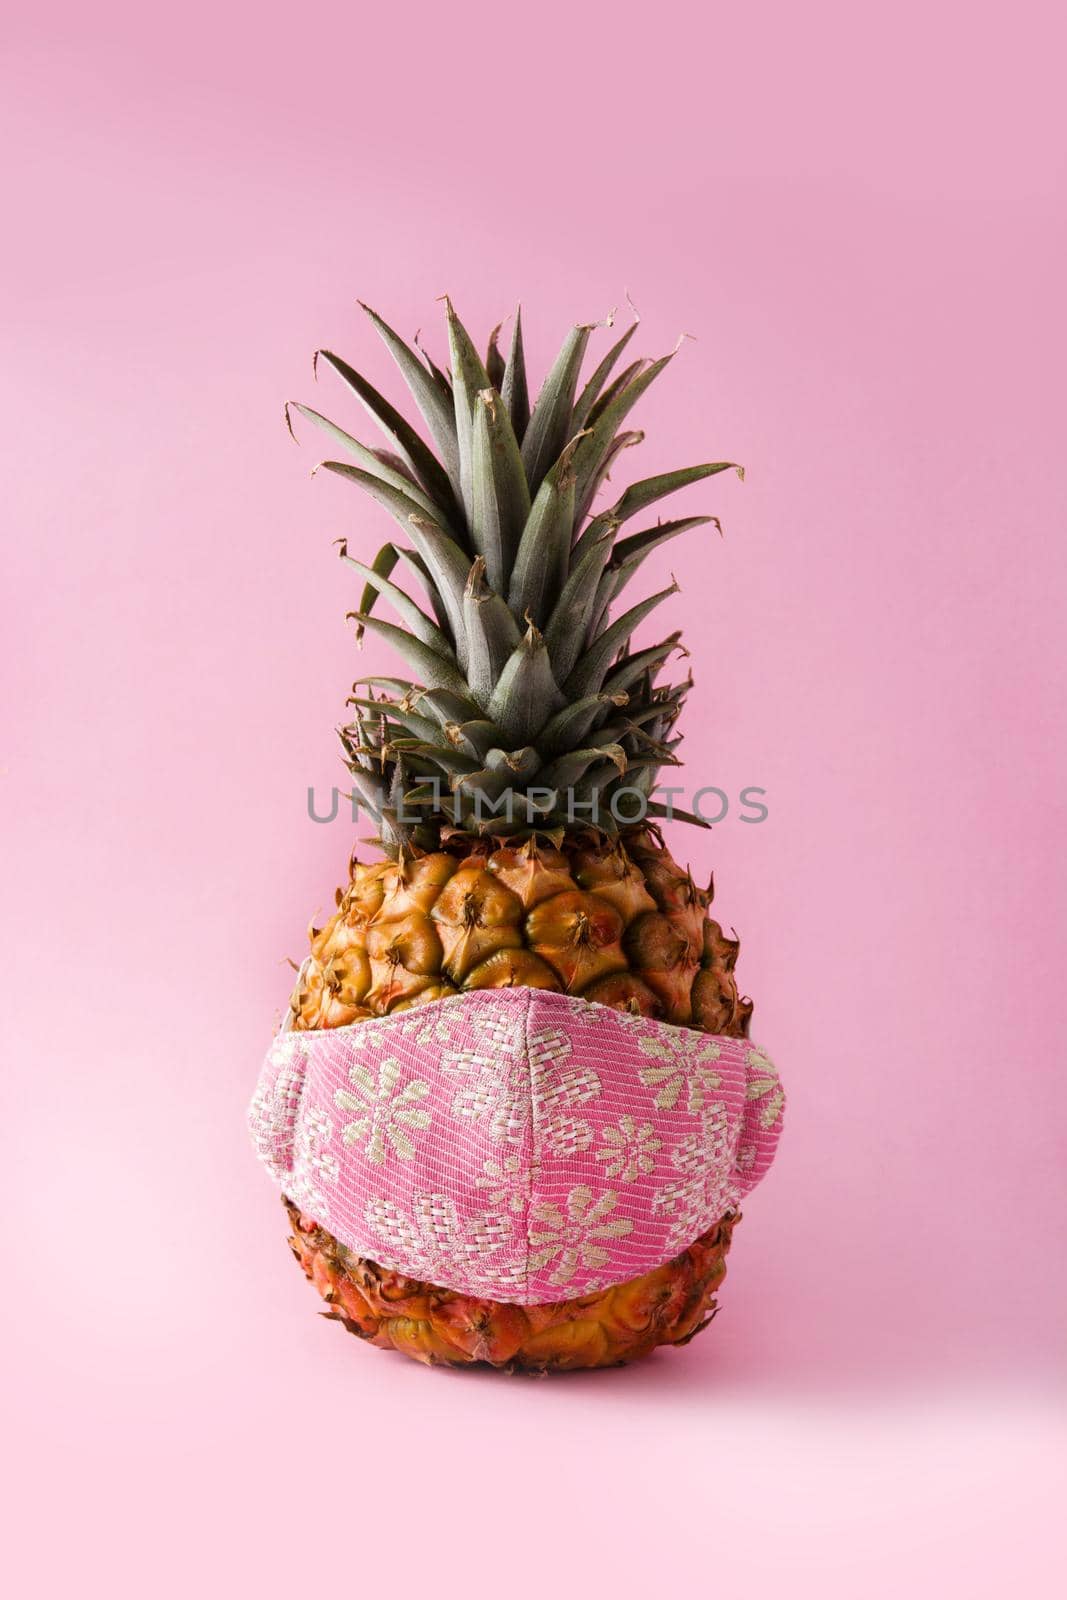 Pineapple with protective face mask  by chandlervid85